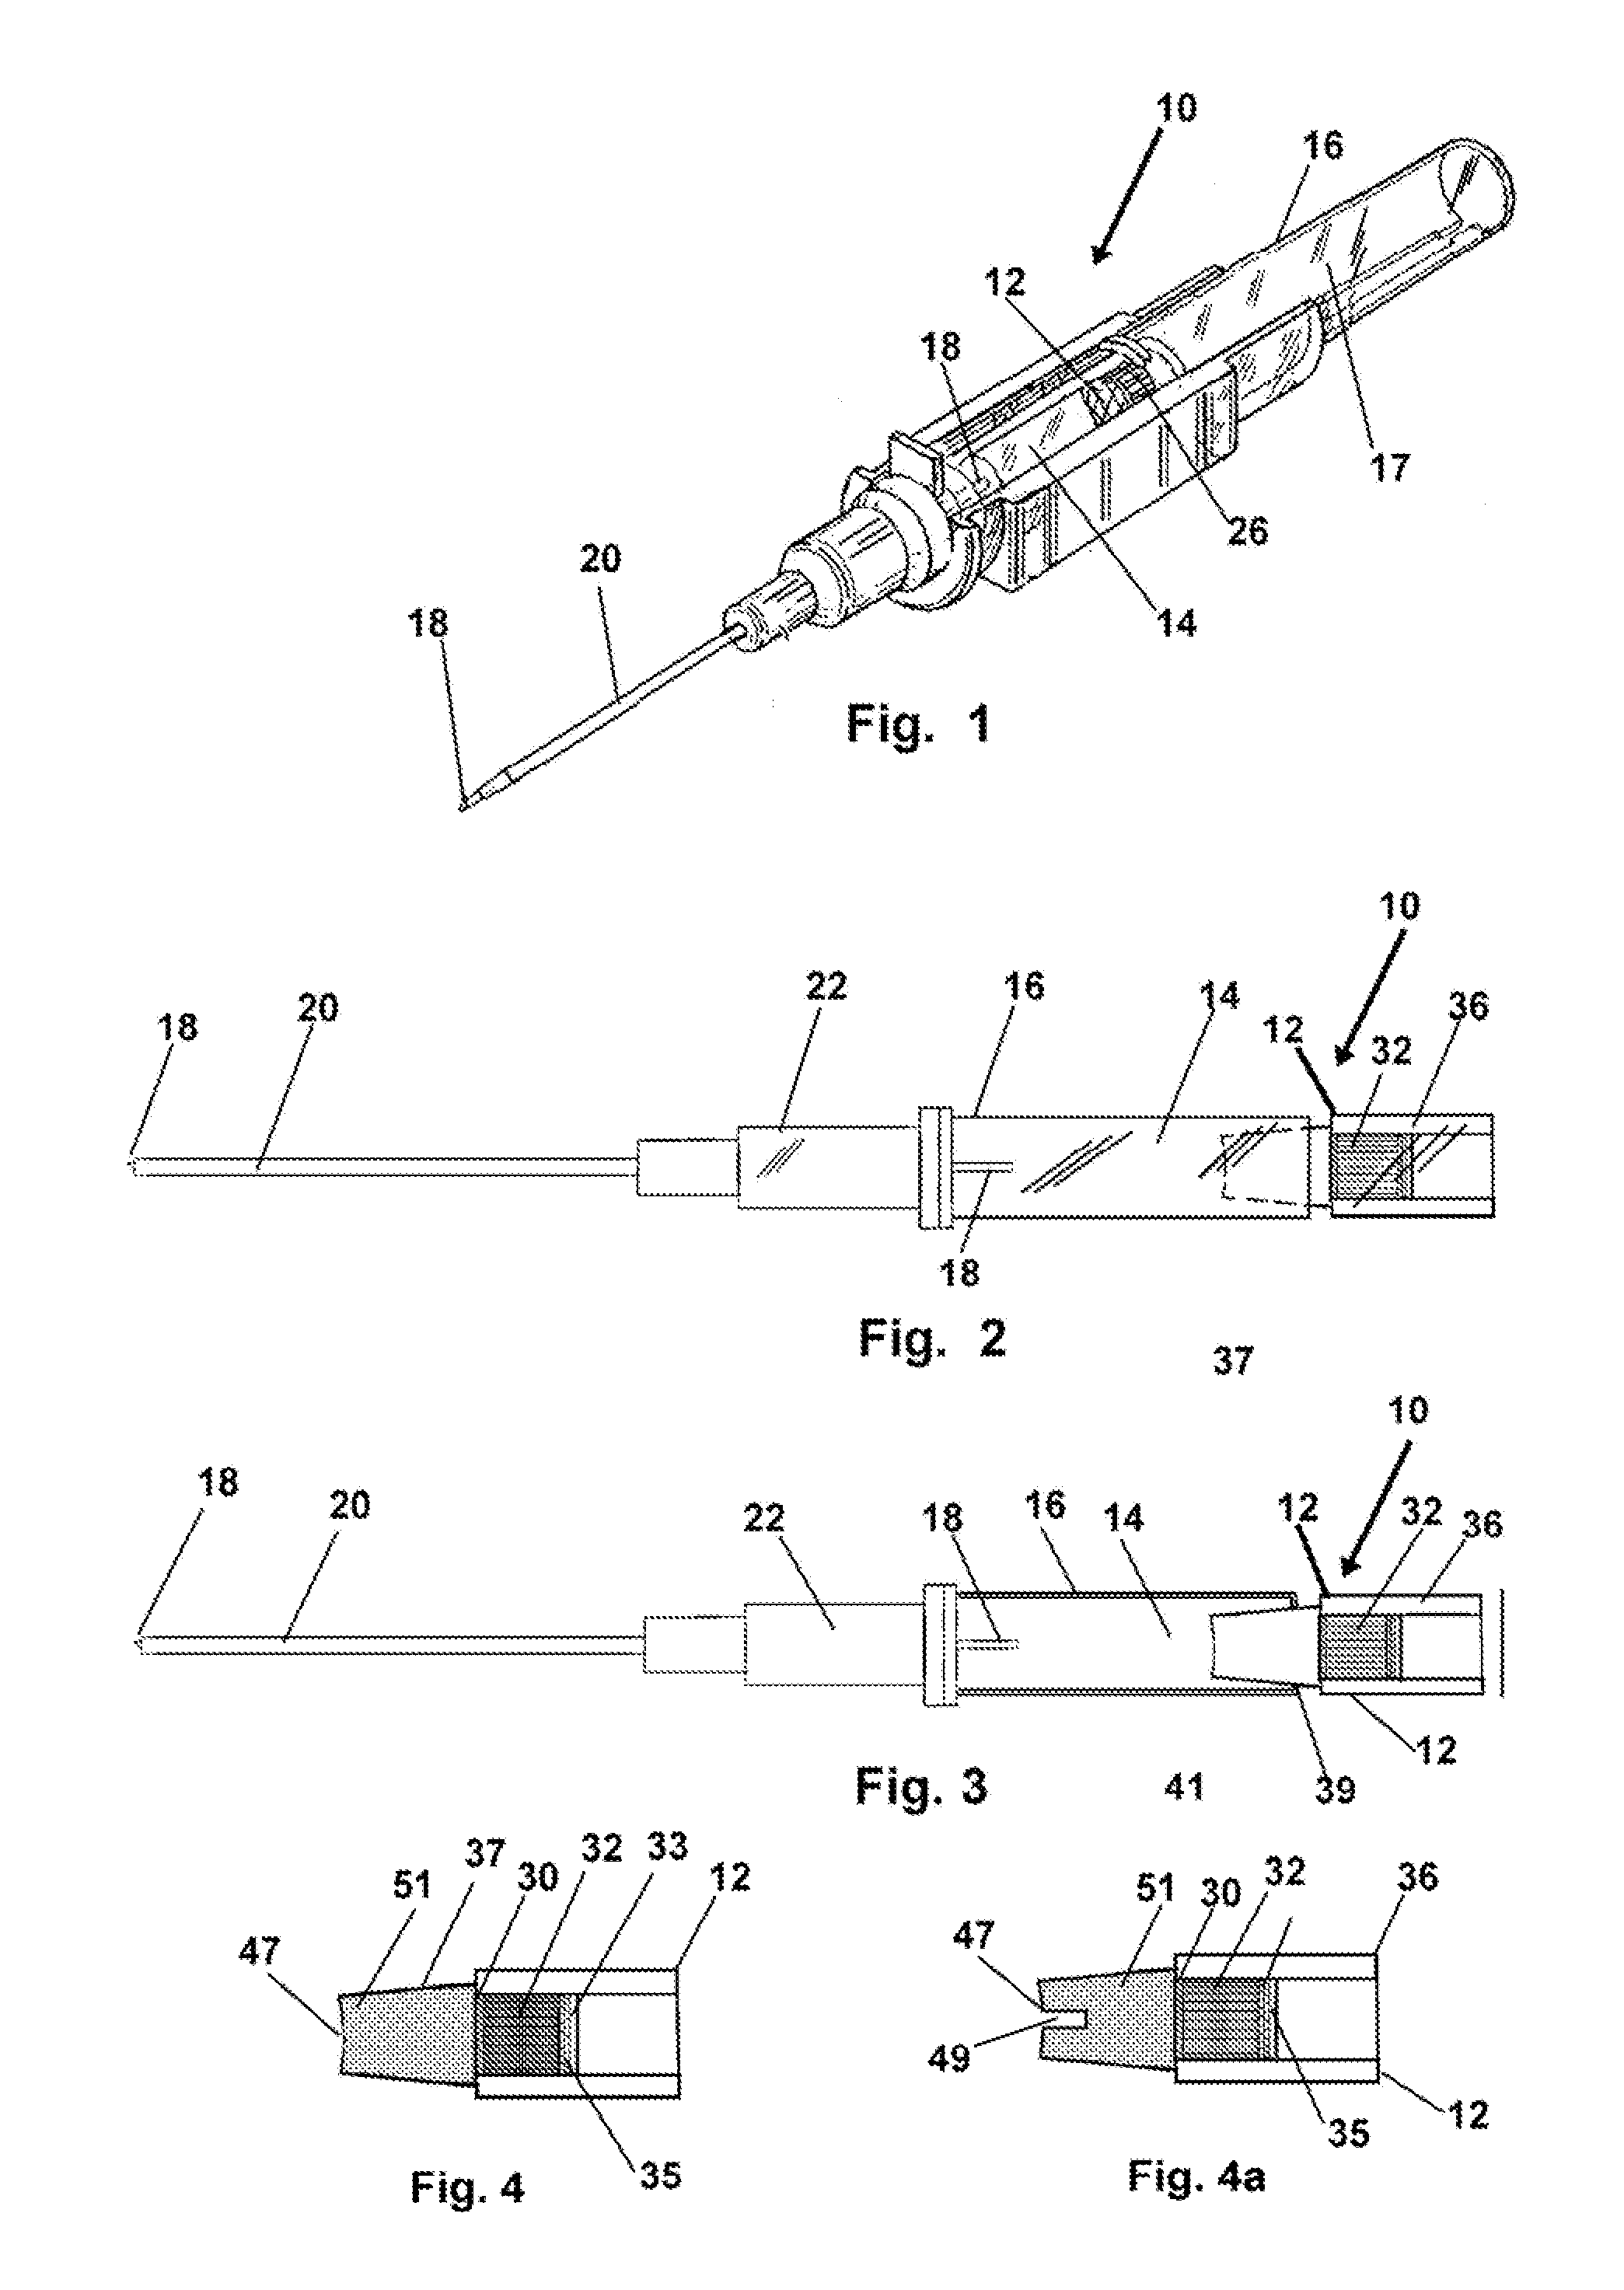 Catheter Insertion Device with Blood Analyzer